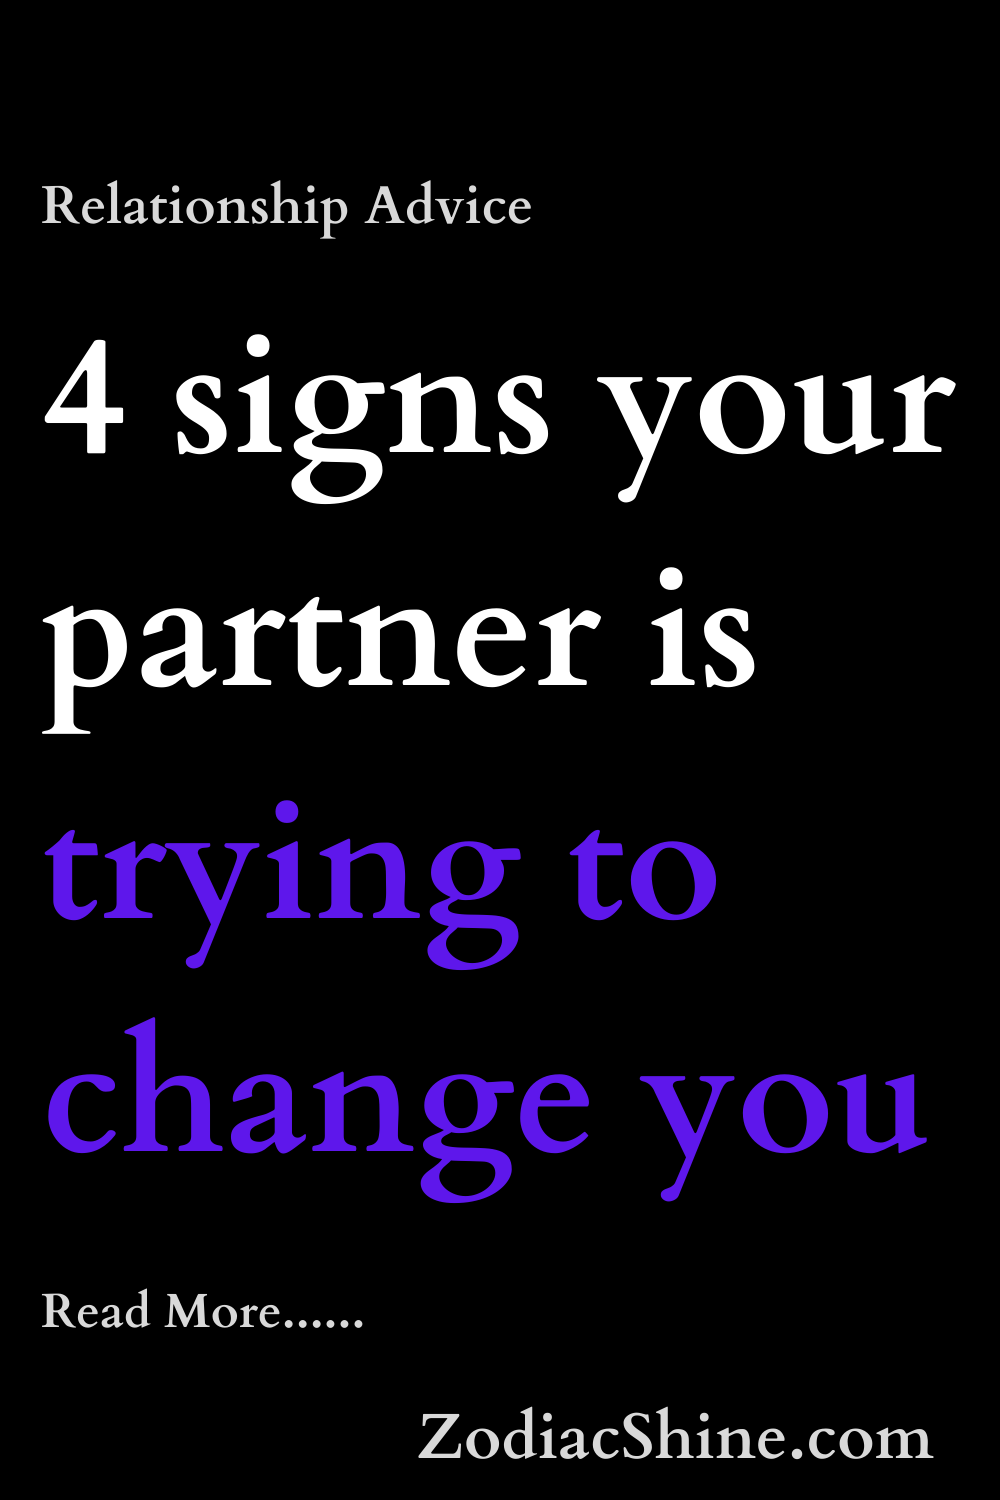 4 signs your partner is trying to change you